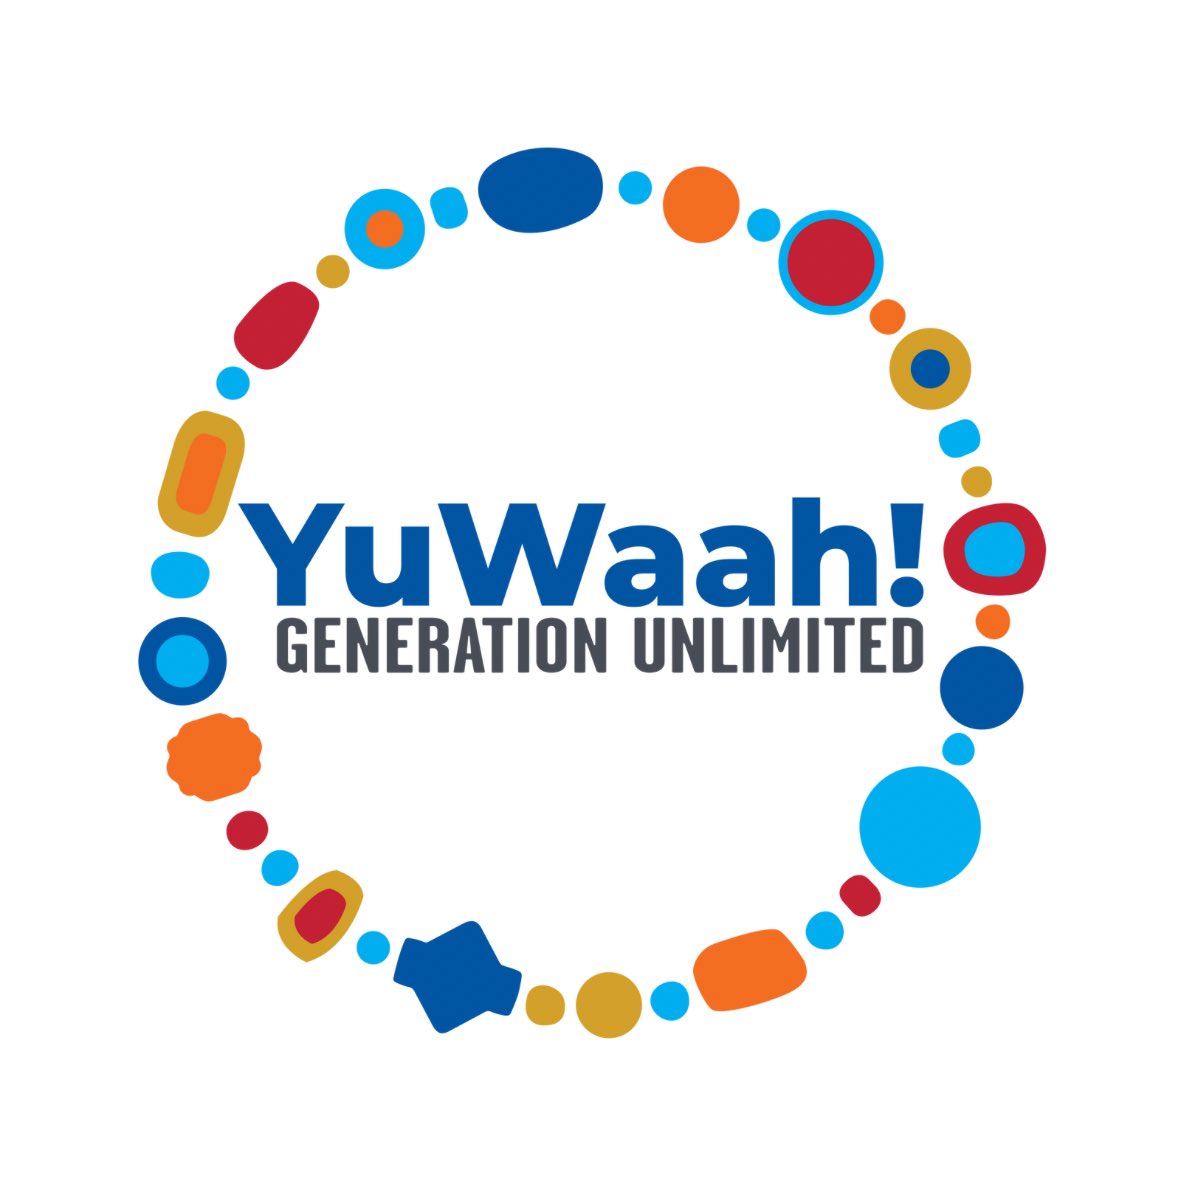 Happy 4th birthday @YuWaahIndia! So amazing to see the strides and impact all of you continue to make with and for young people, under @dhuwarakha’s extraordinary leadership. Here’s to ‘4’ever being Dil Se YuWaah 🎉💙